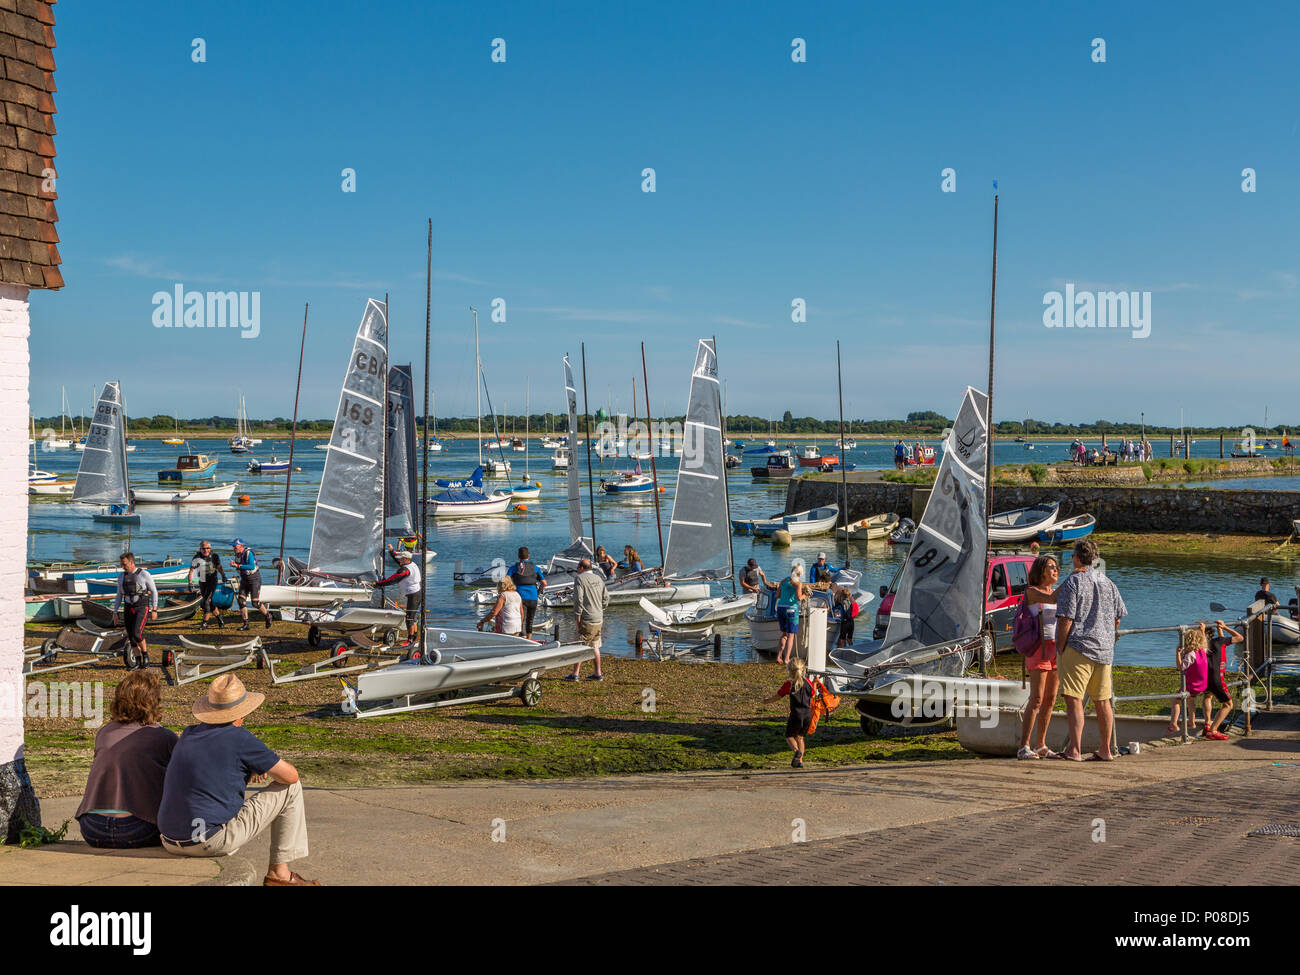 A couple sitting down, look out toward Emsworth basin in Chichester harbour, sailors enjoy warm summer sunshine and fair winds, Emsworth Hampshire UK Stock Photo